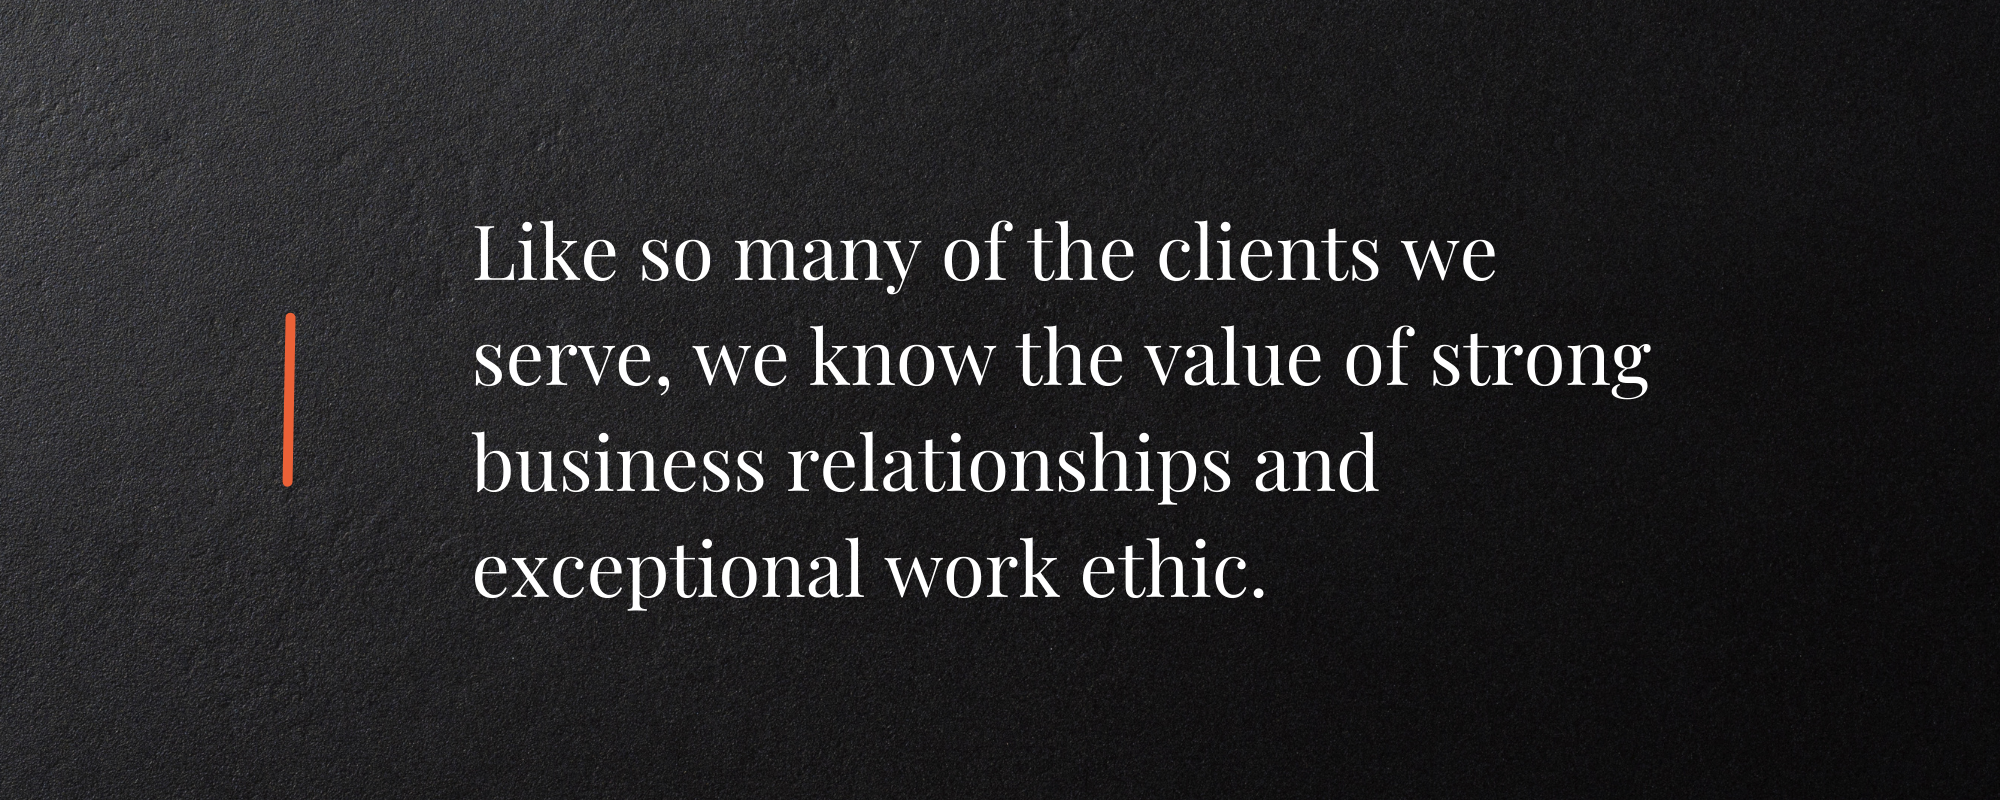 Like so many of the clients we serve, we know the value of strong business relationships and exceptional work ethic.